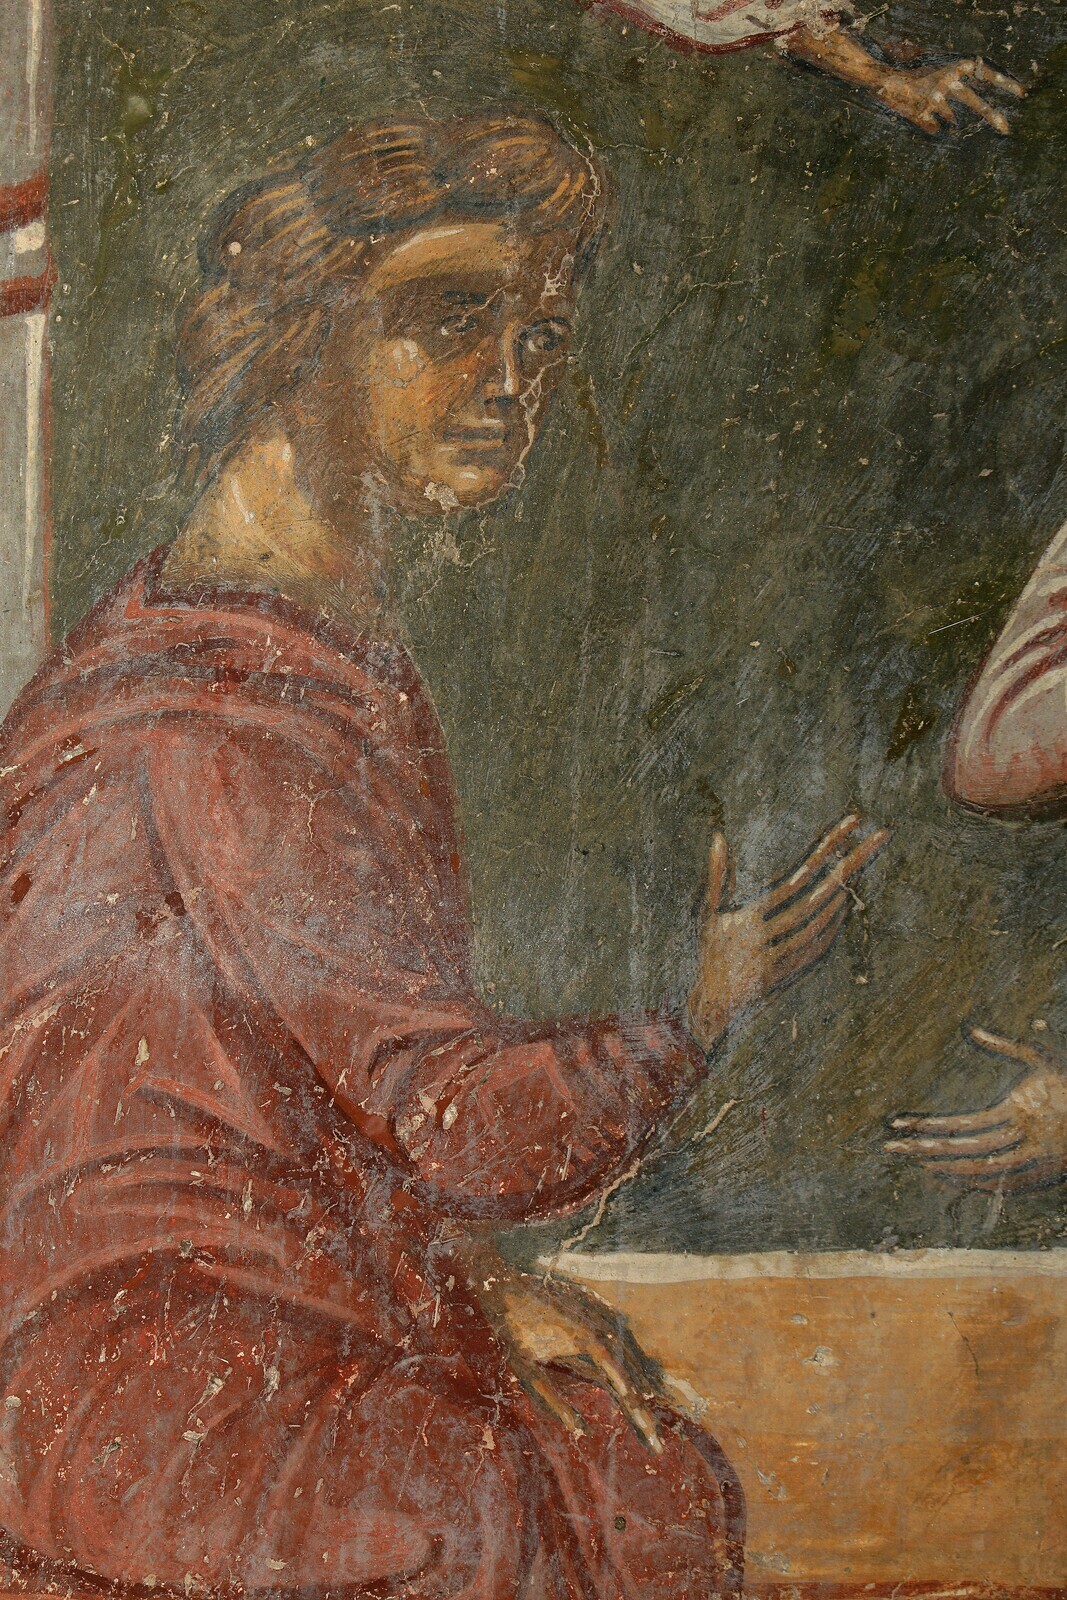 Saint Nicholas Rescues the Three Innocents from the Dungeon, detail